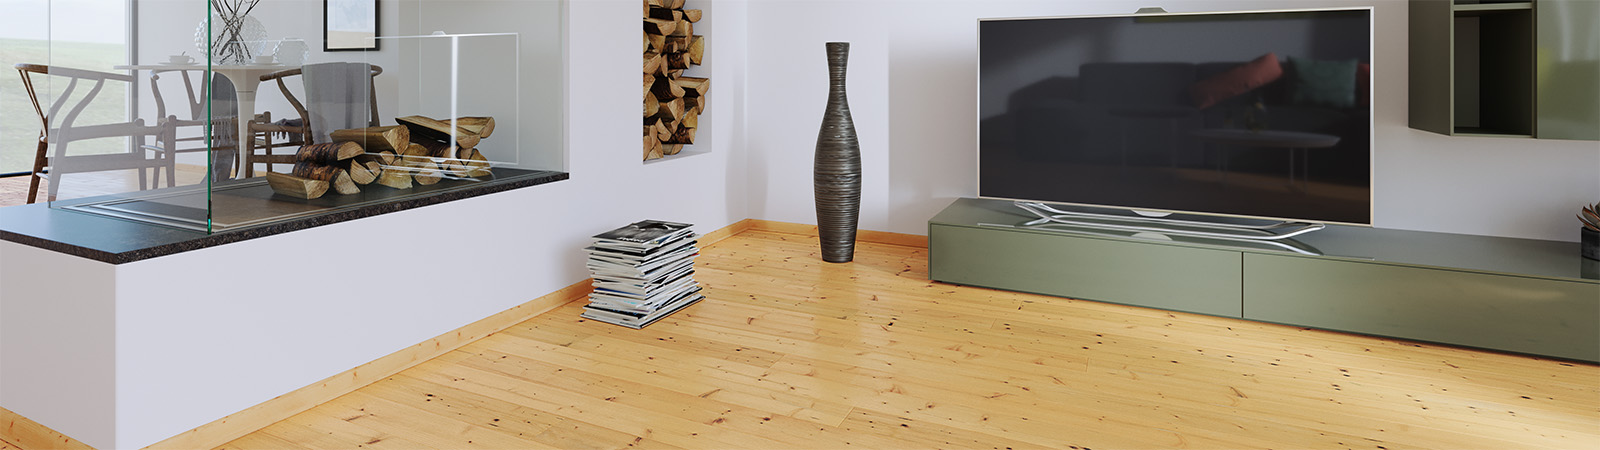 Knotty Siberian Larch grade A/B flooring from Osmo brings a touch of nature to any room.